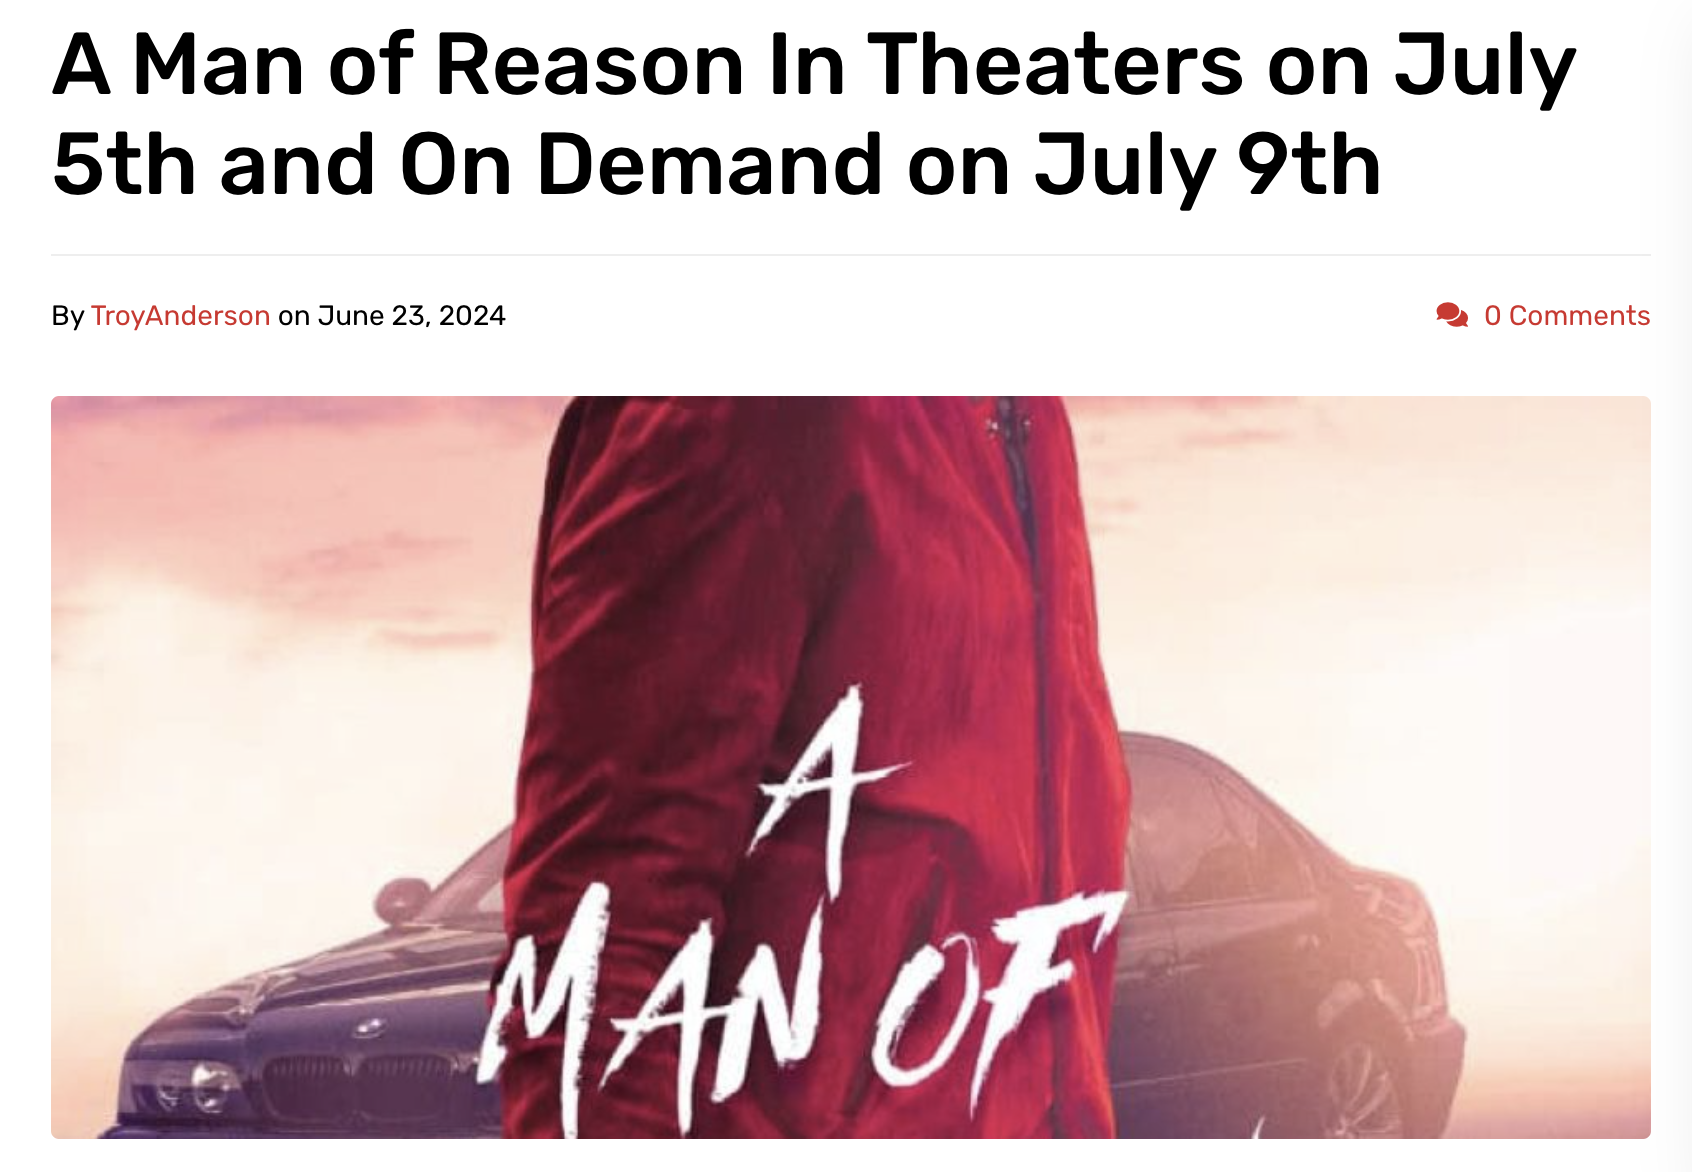 A Man of Reason In Theaters on July 5th and On Demand on July 9th